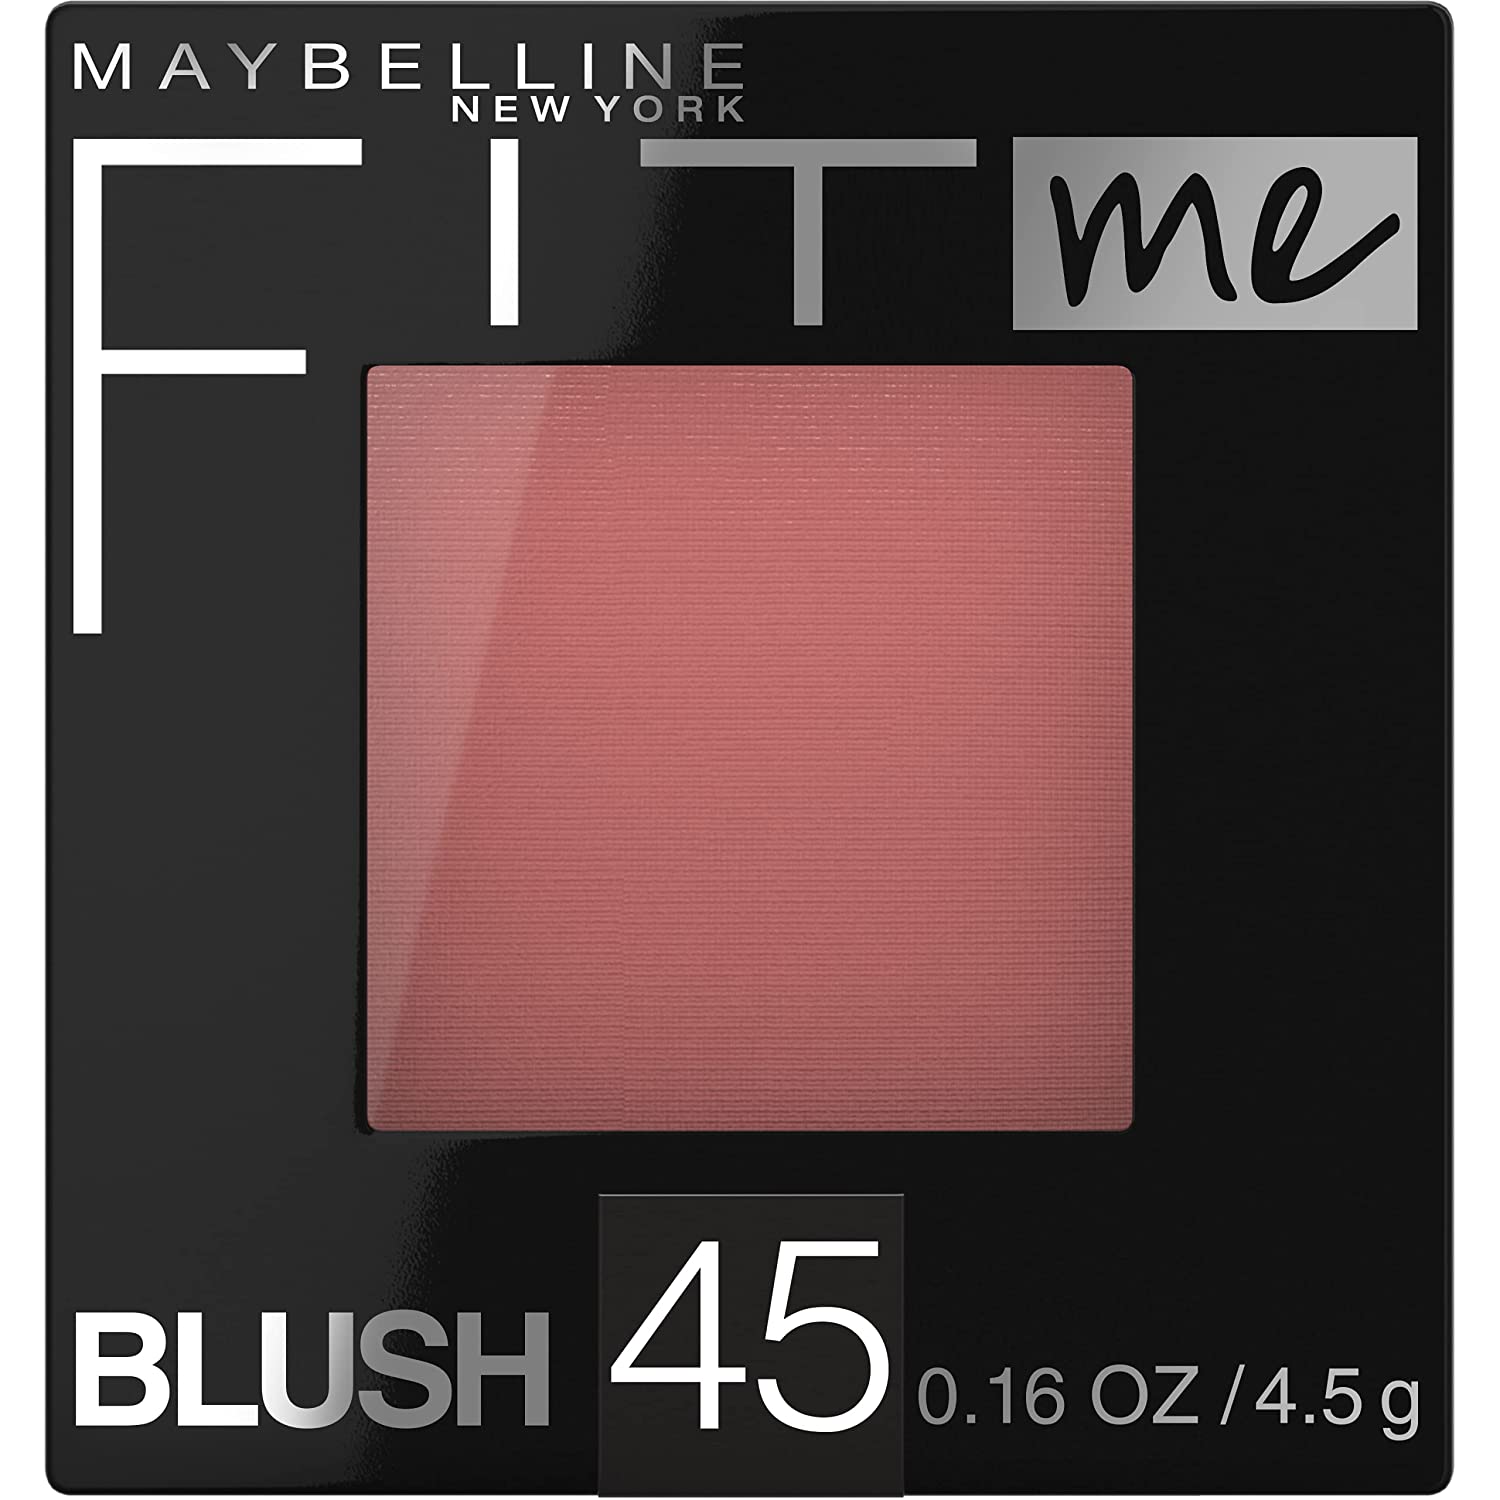 Maybelline New York Fit Me Blush $4.39 Free Shipping